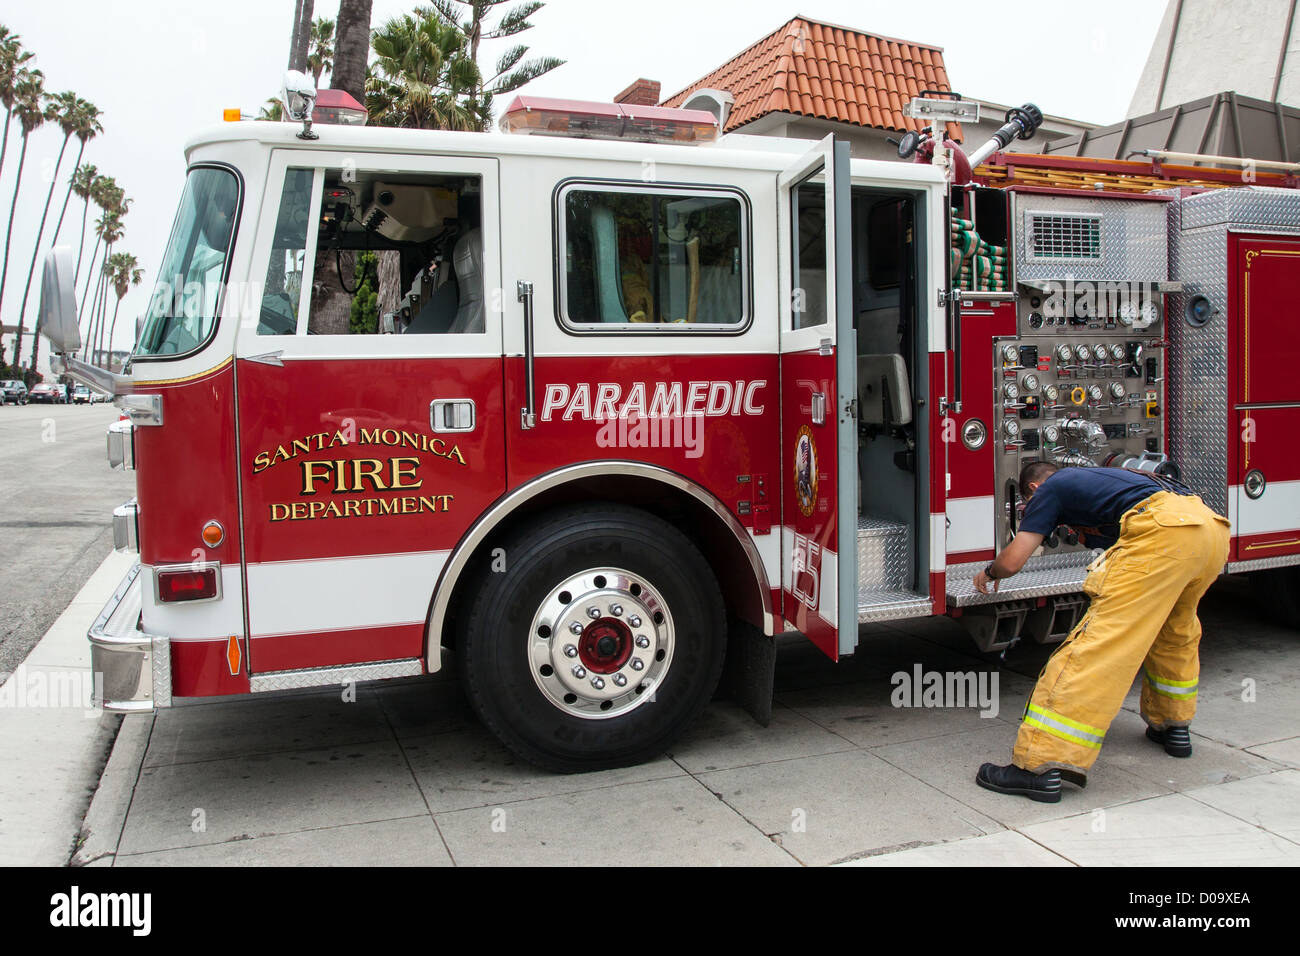 FIREFIGHTER PREPARING A FIRE ENGINE FOR A FIRE IN SANTA MONICA LOS ANGELES CALIFORNIA UNITED STATES USA Stock Photo